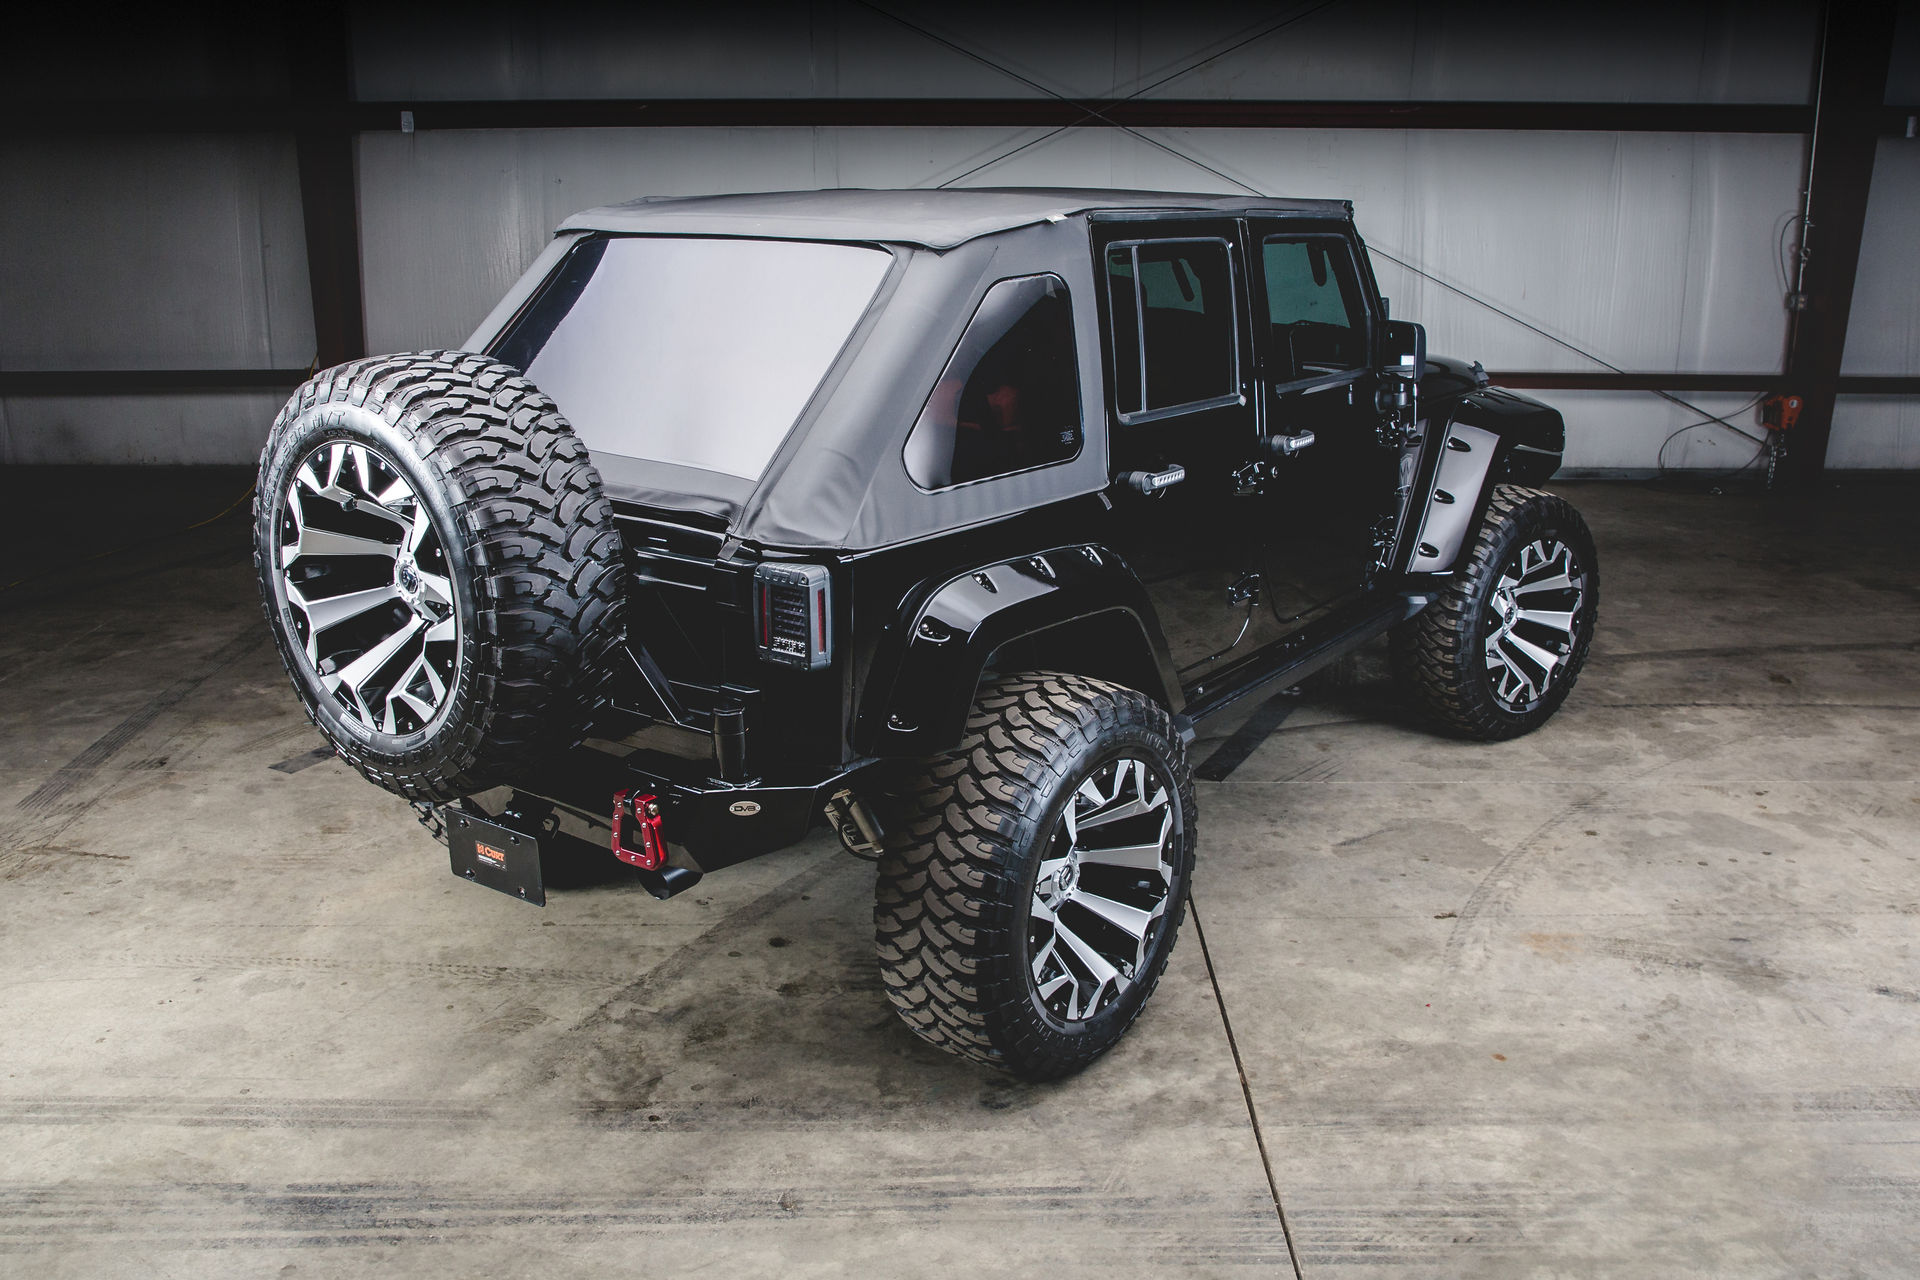 Heavily Modified 2017 Jeep Wrangler Is A Devilish Off-Roader | Carscoops